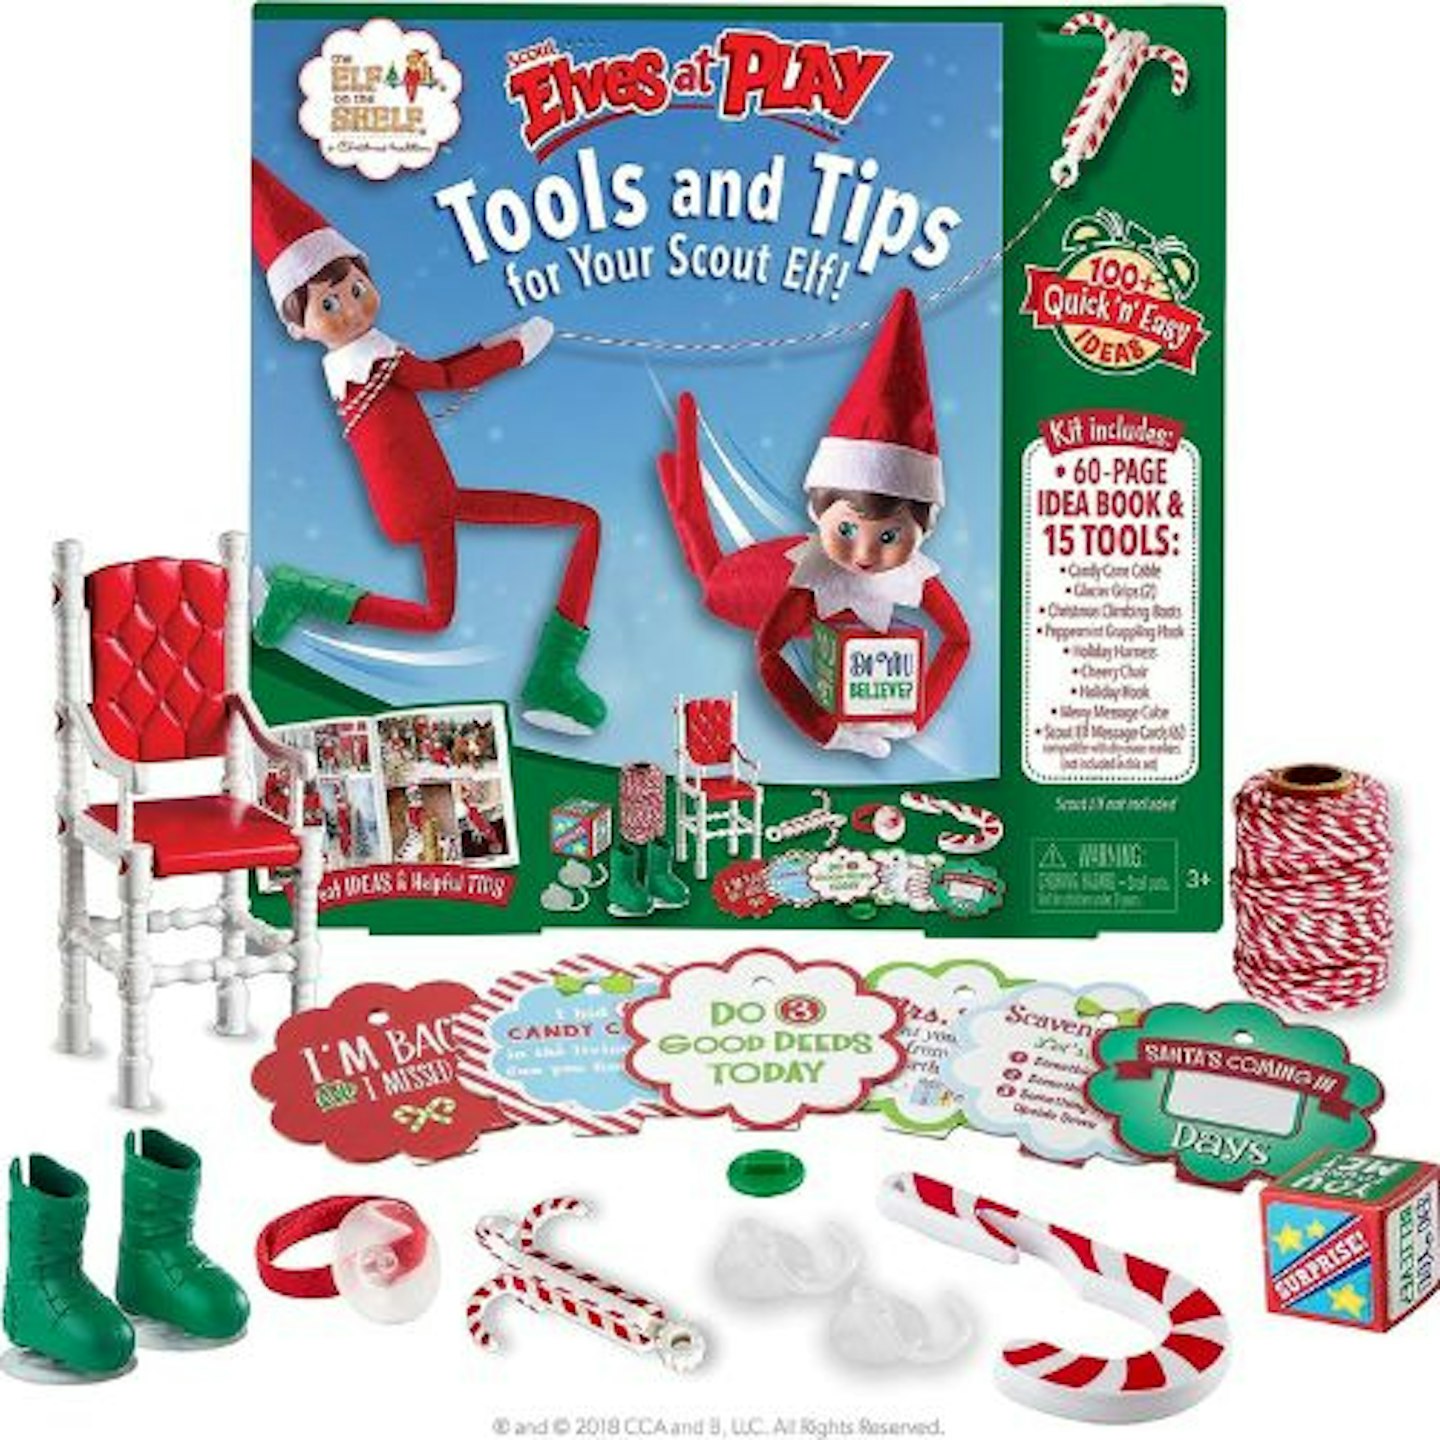 Best Elf on the Shelf Play Kit with Ideas Book